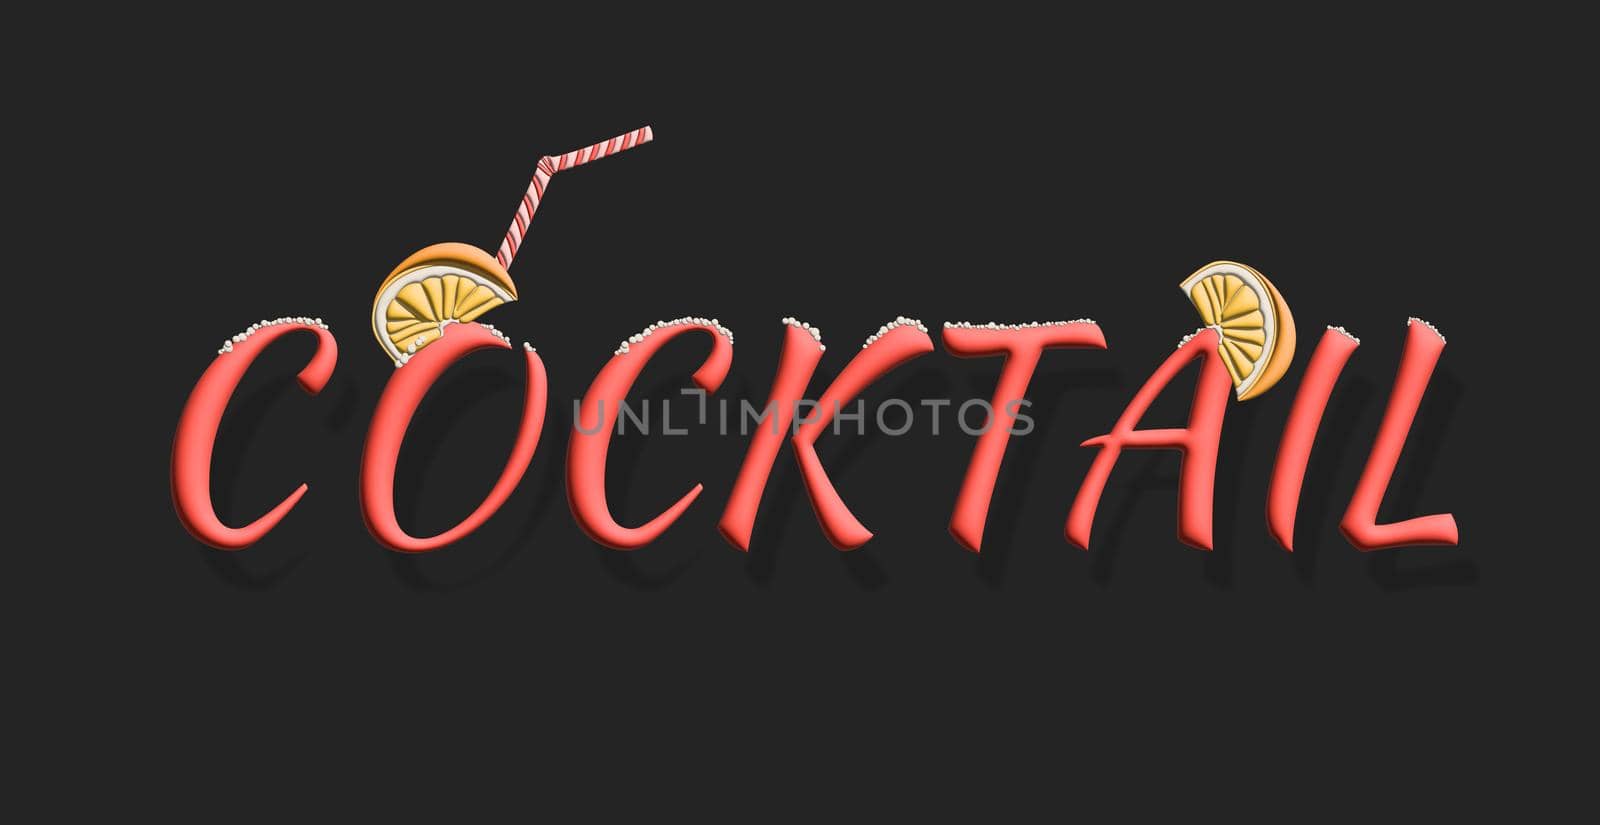 Stylized text COCKTAIL. Stylish design for a brand, label or advertisement - 3D image by BEMPhoto